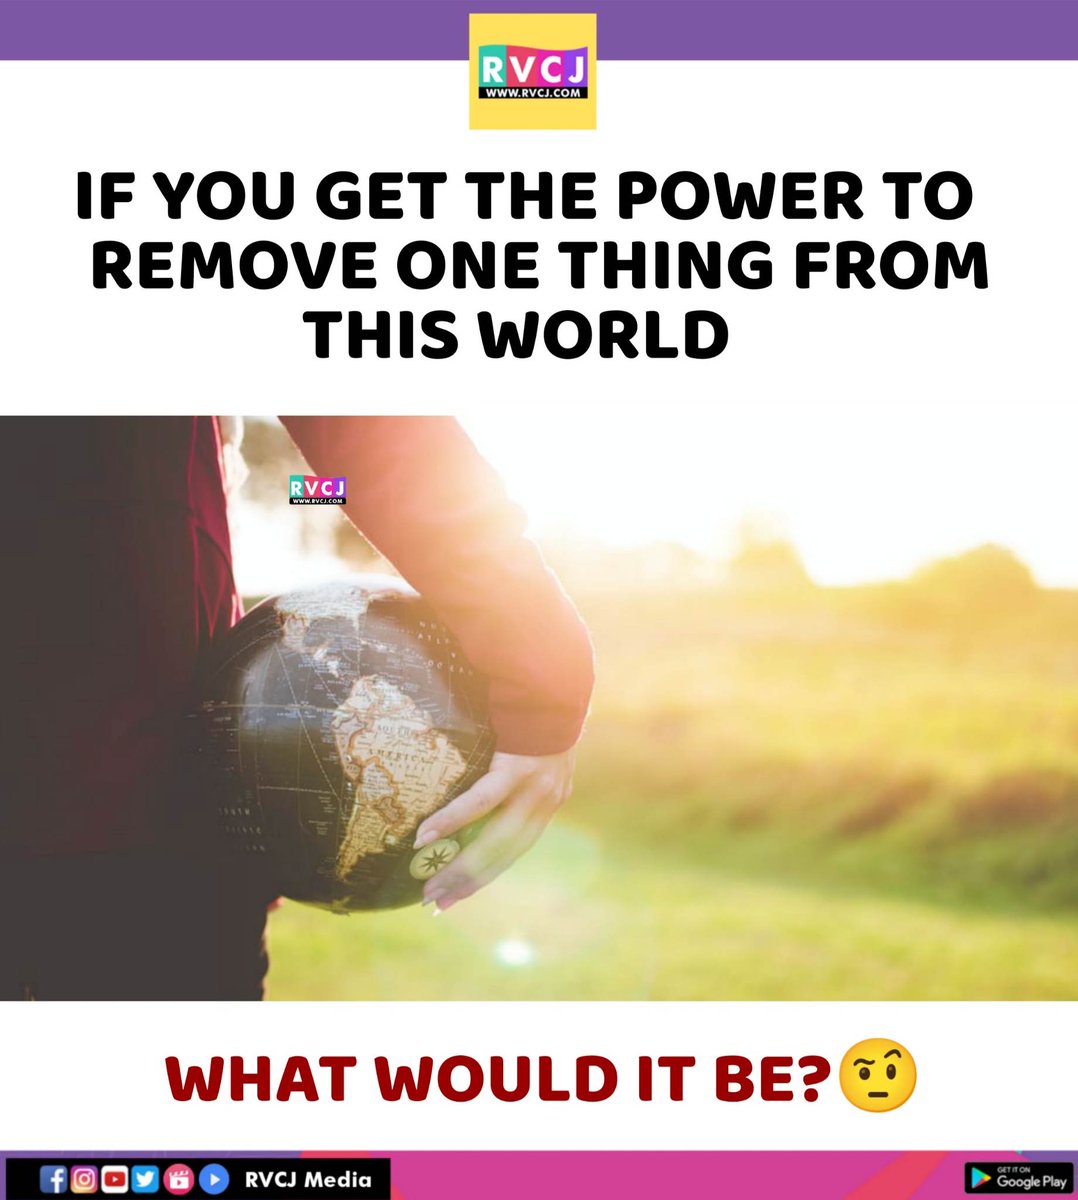 What would it be?